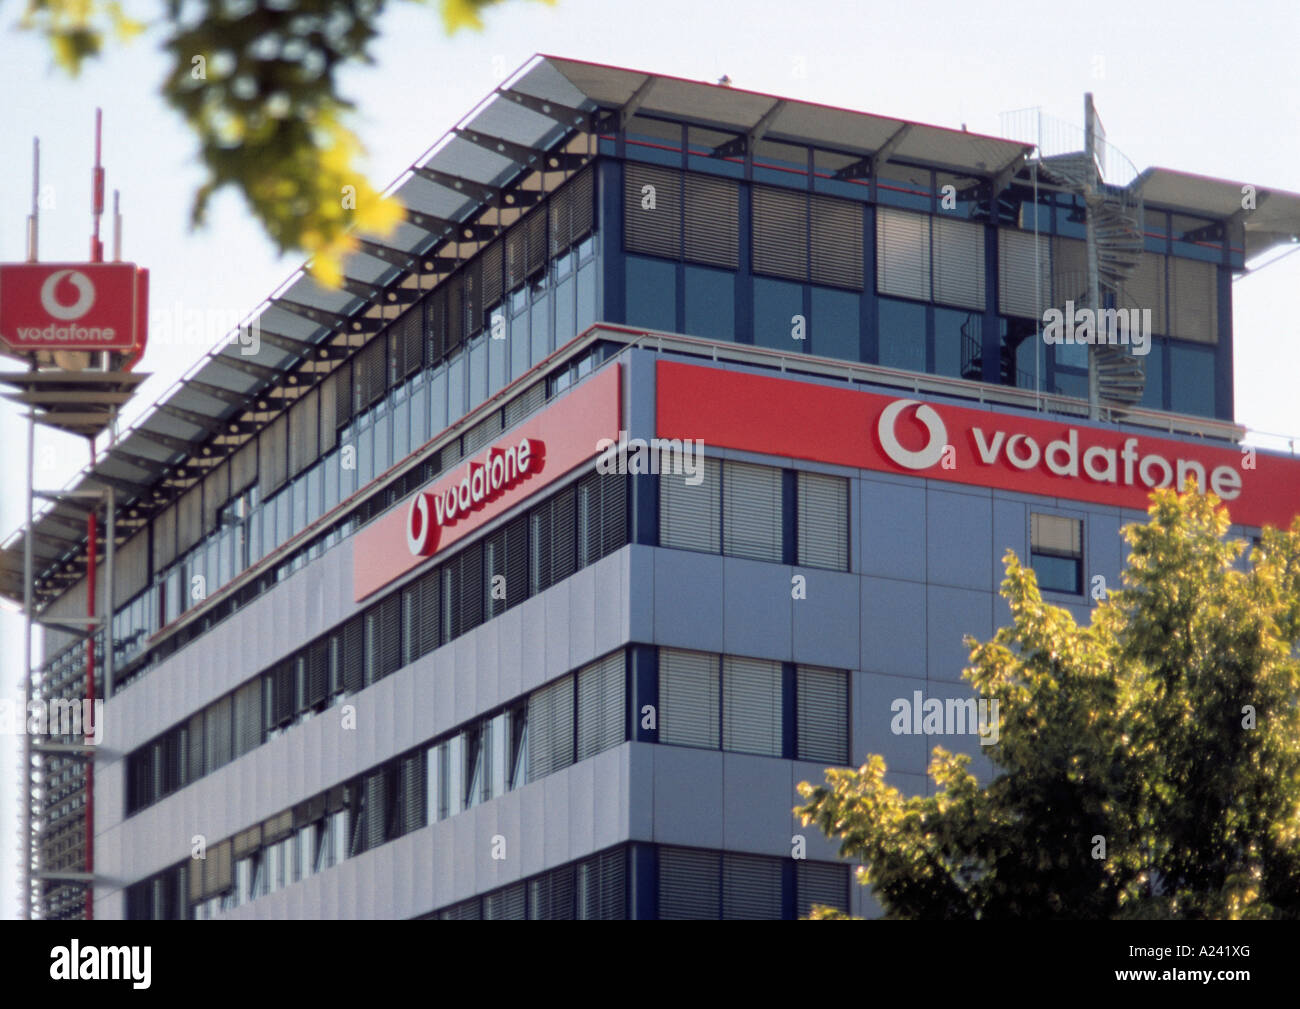 Branch office of the telecommunications company Vodafone ...